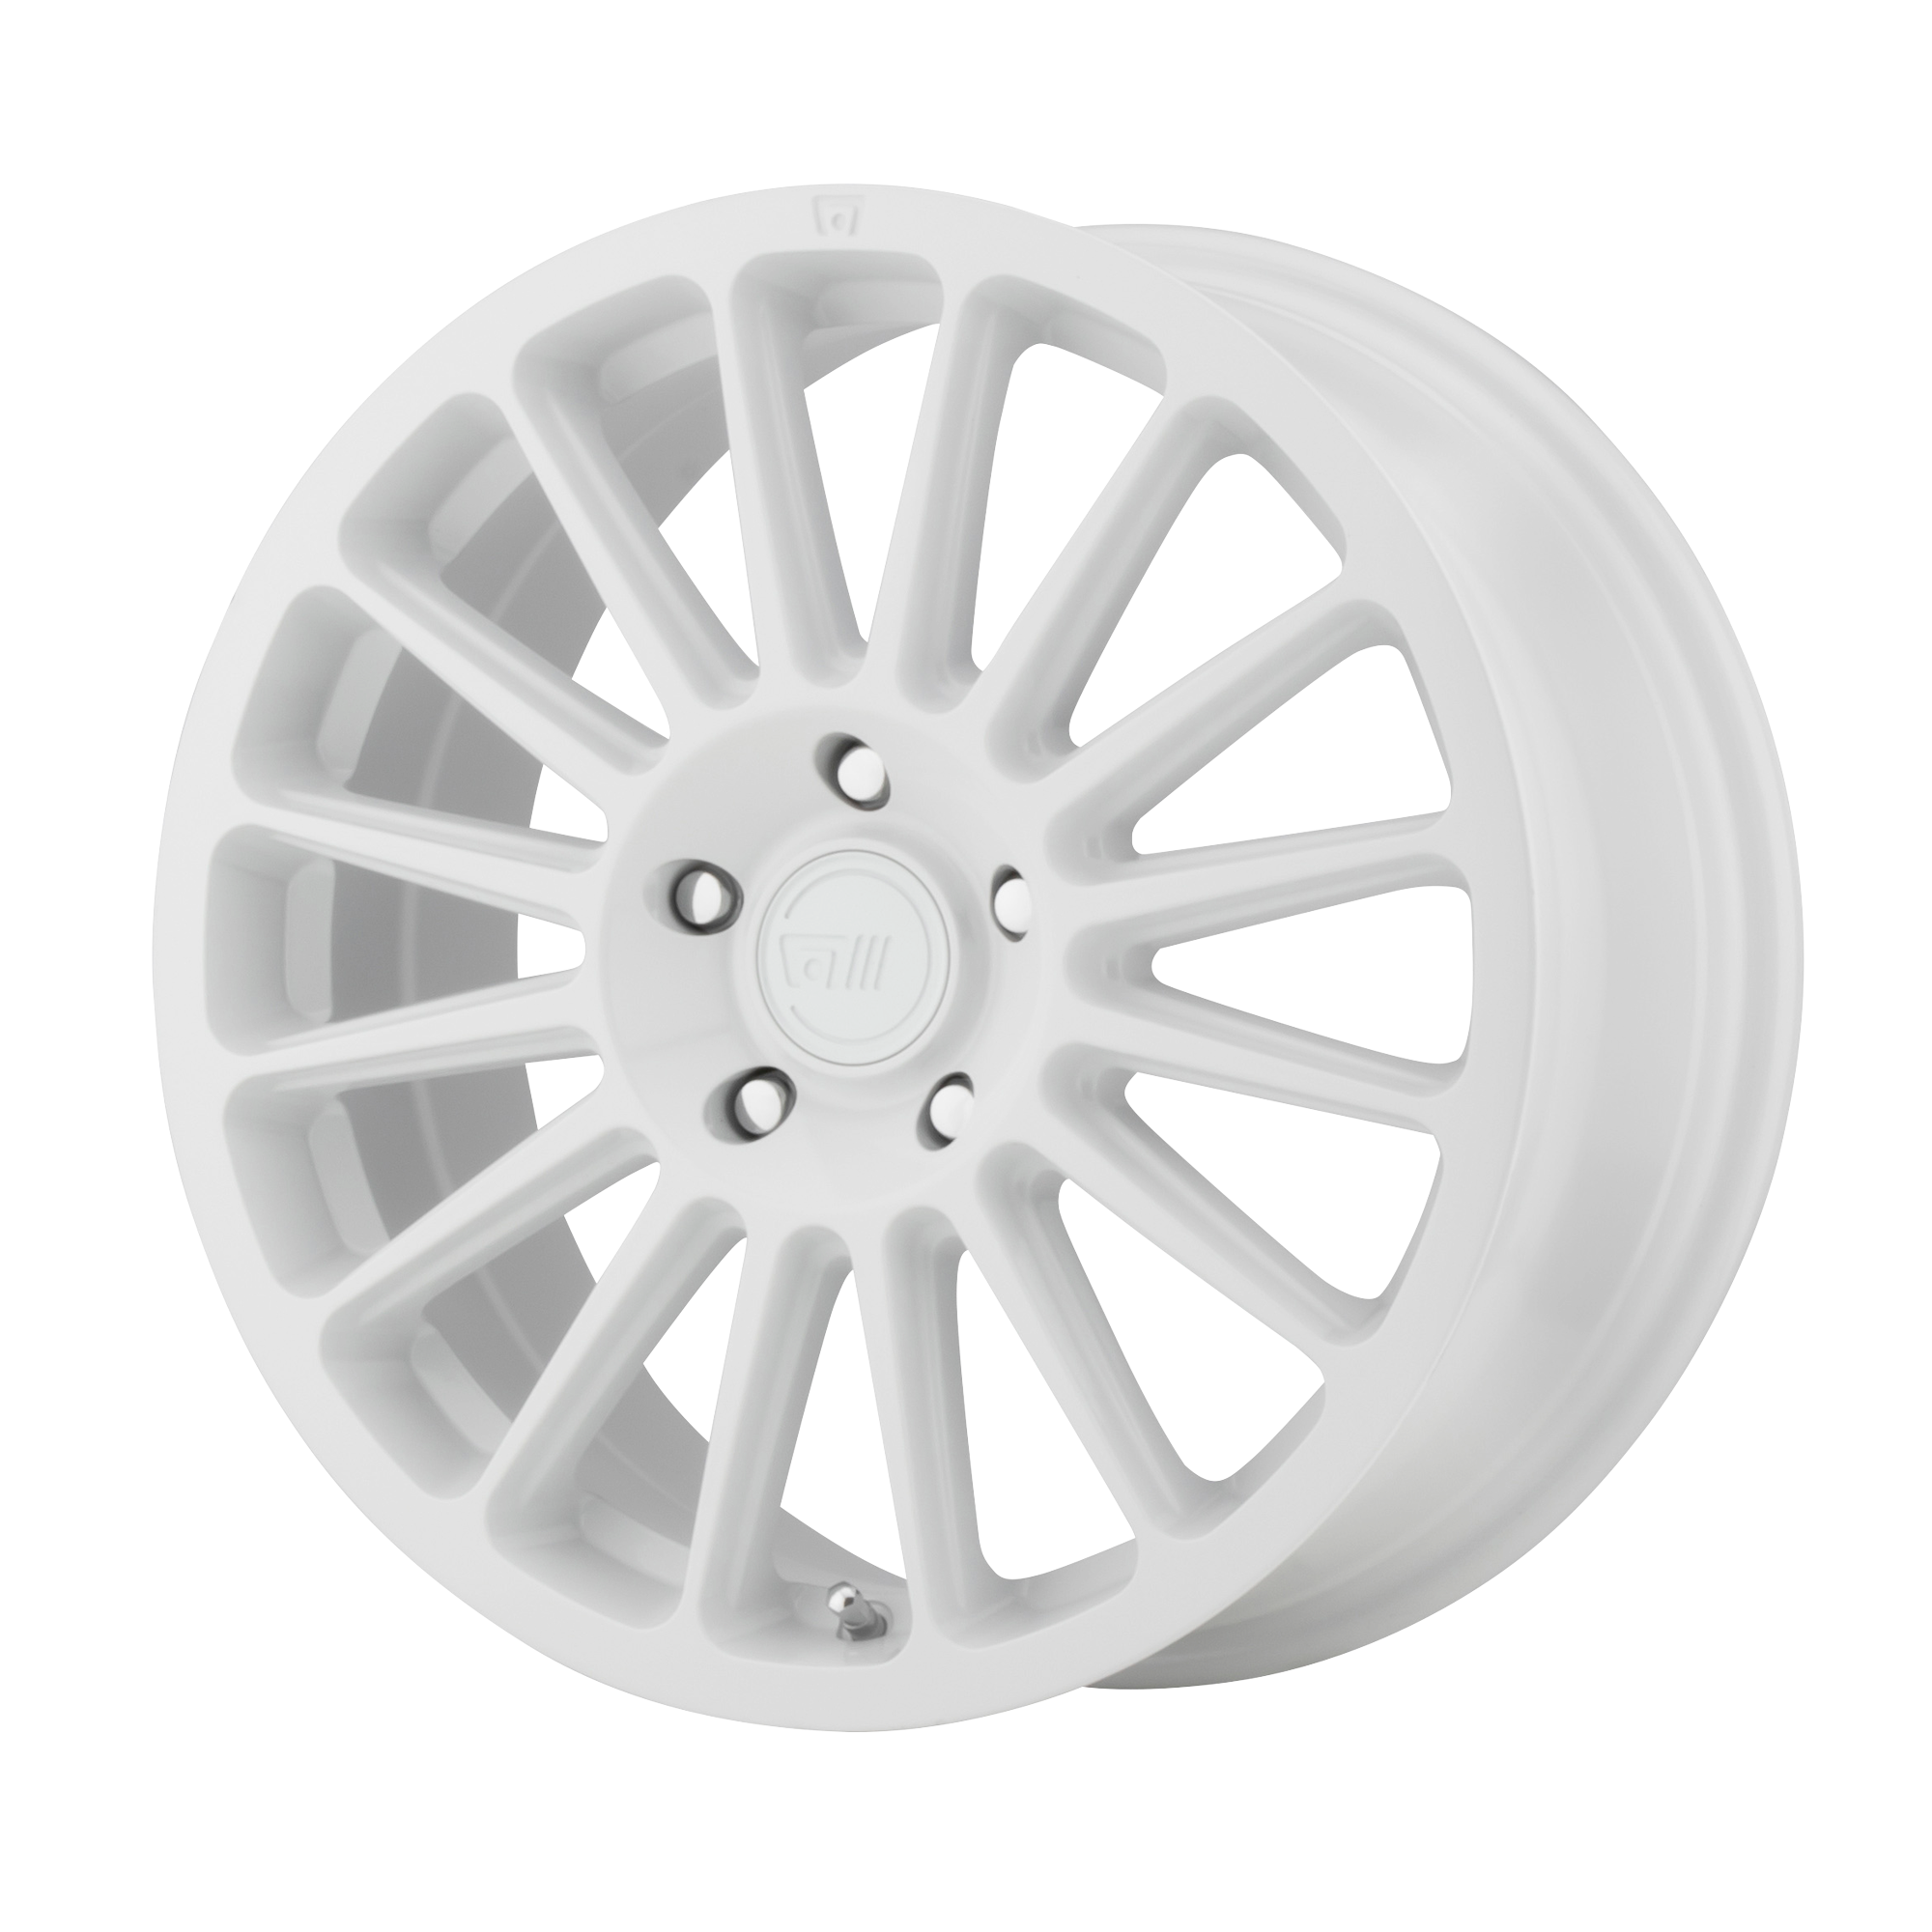 MR141 17x7.5 5x112.00 WHITE (40 mm) - Tires and Engine Performance